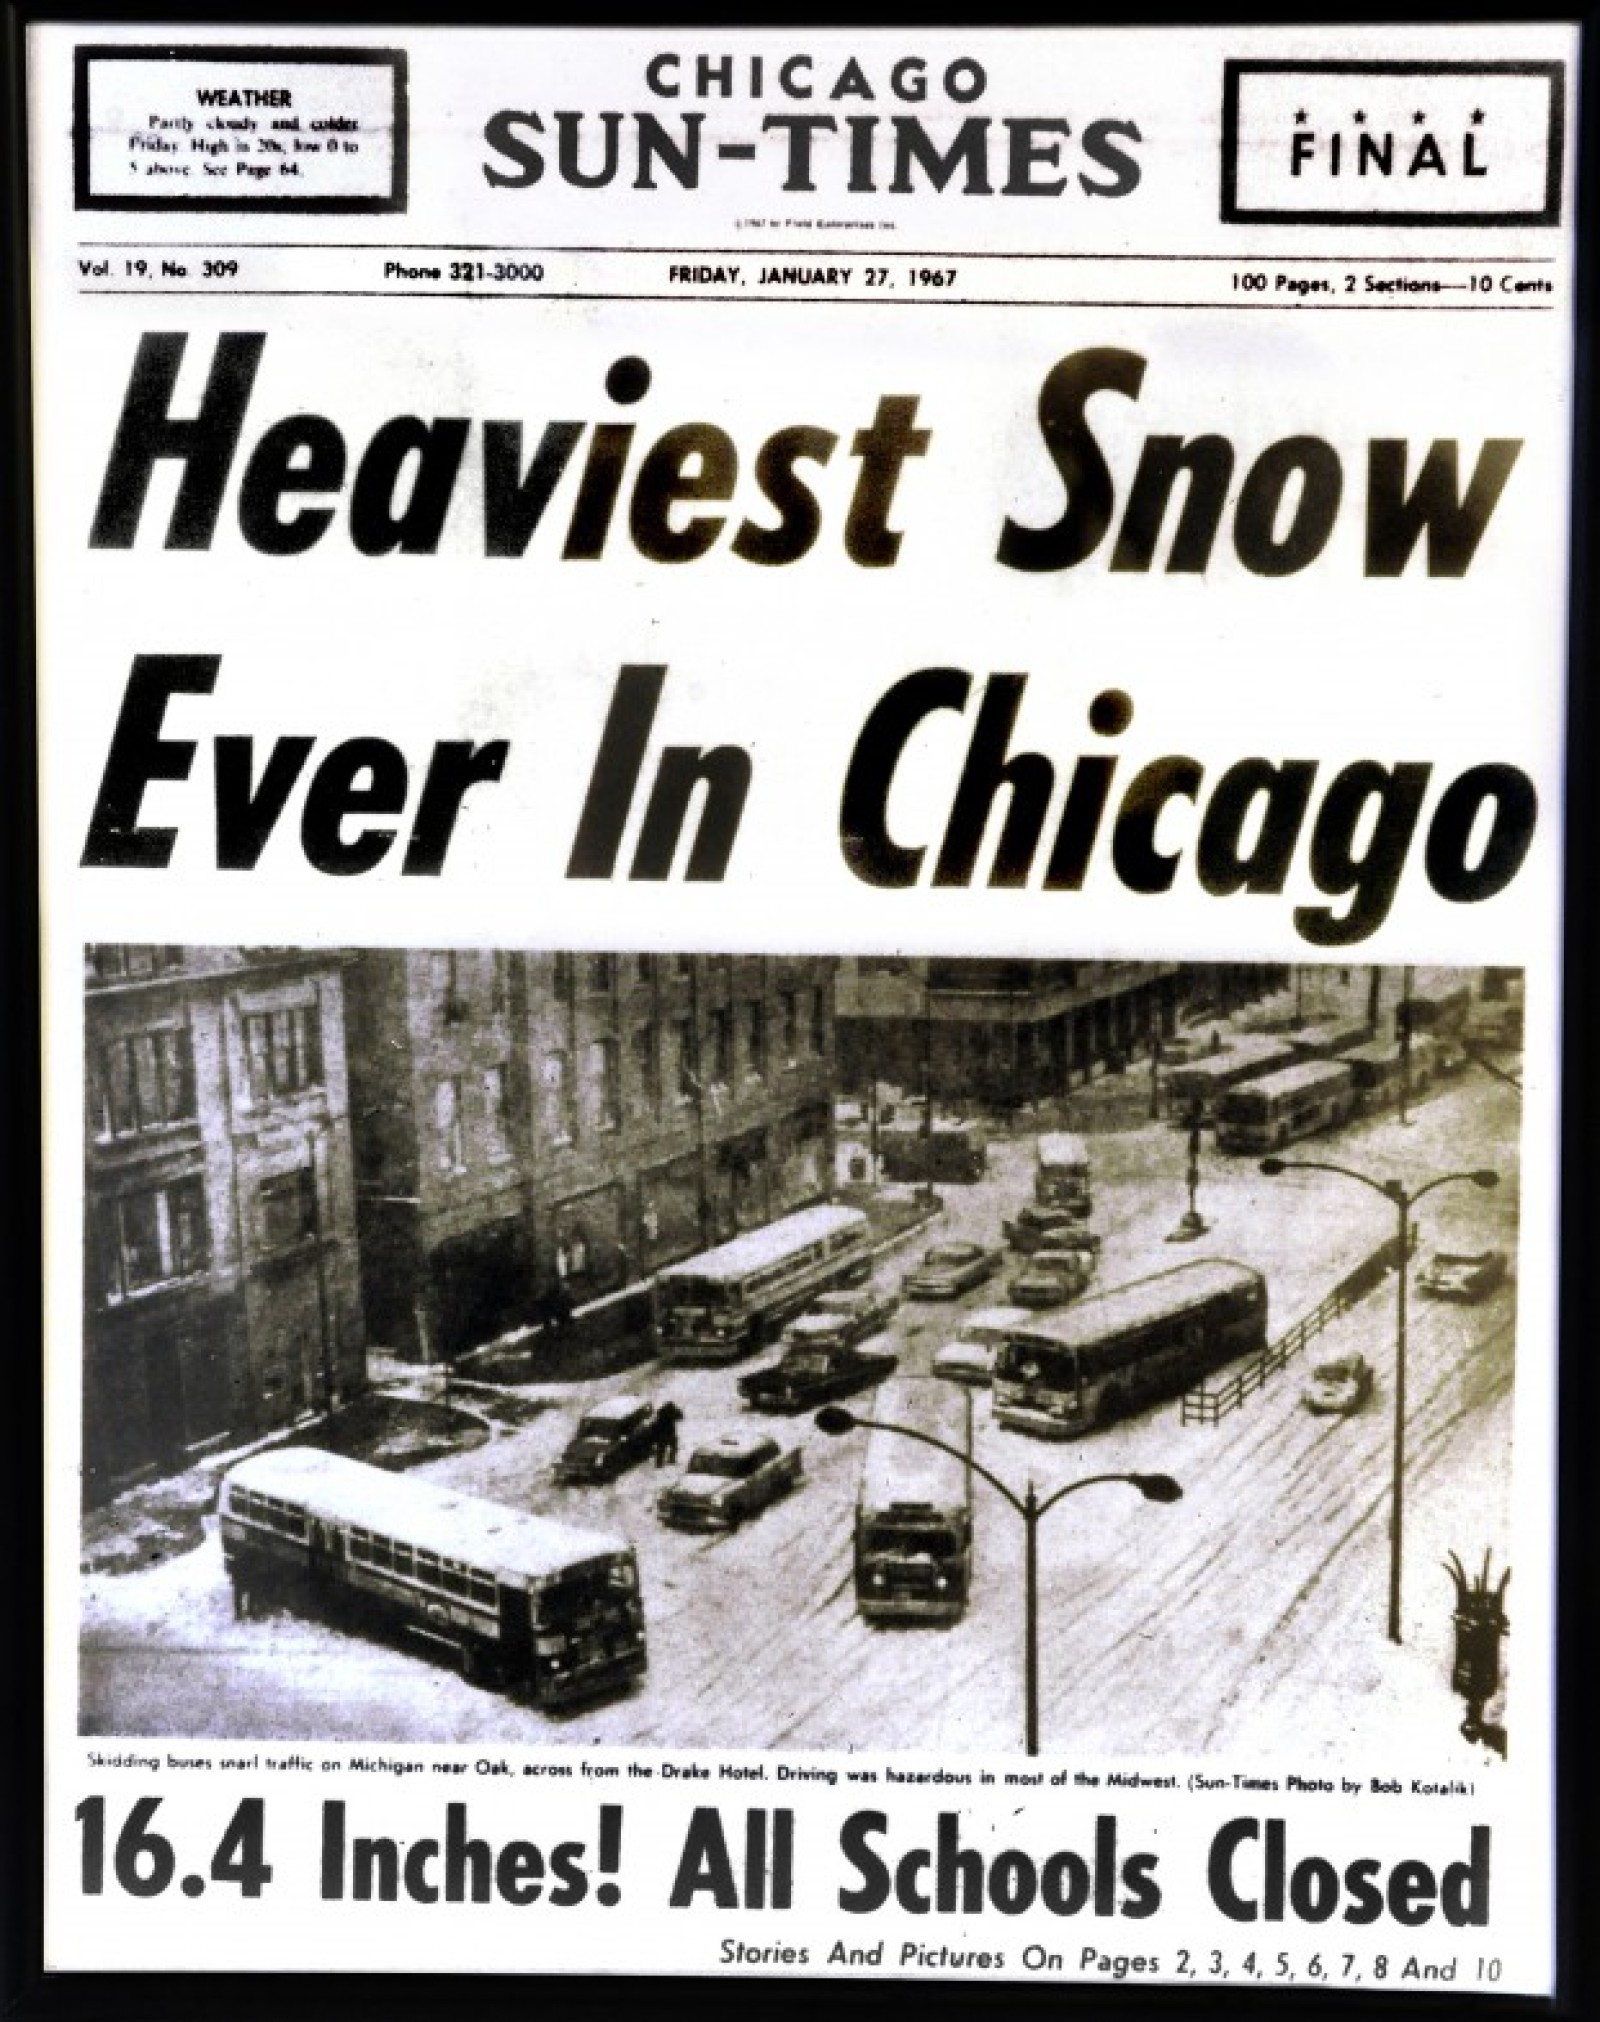 50 Years Later The 1967 Blizzard In Chicago WBEZ Chicago